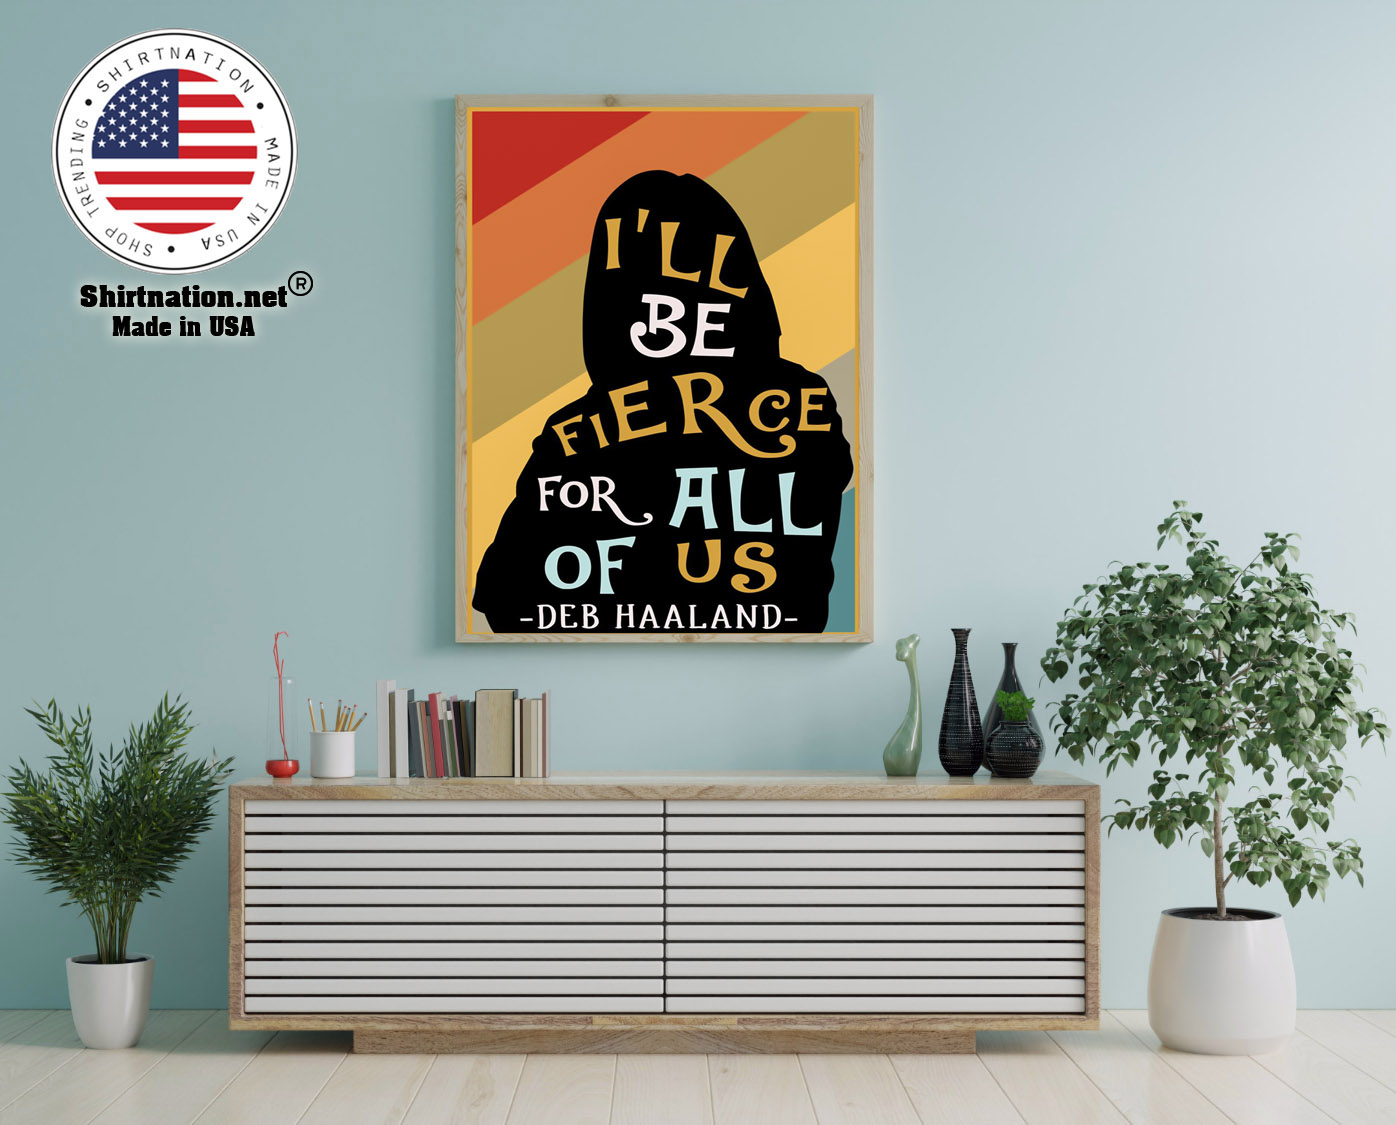 Ill be fierce for all of us deb haaland poster 12